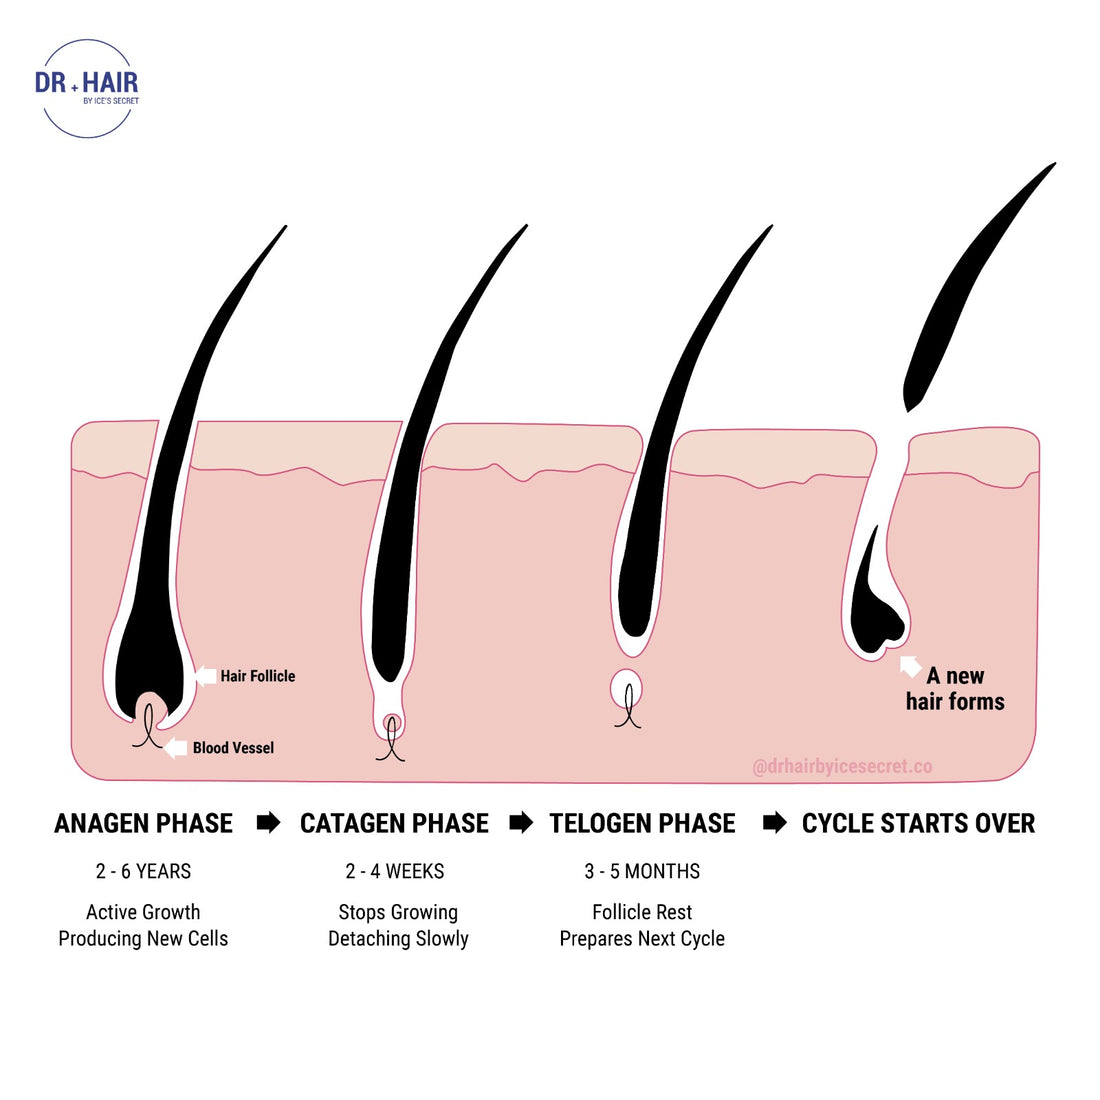 Hair loss - why it happens